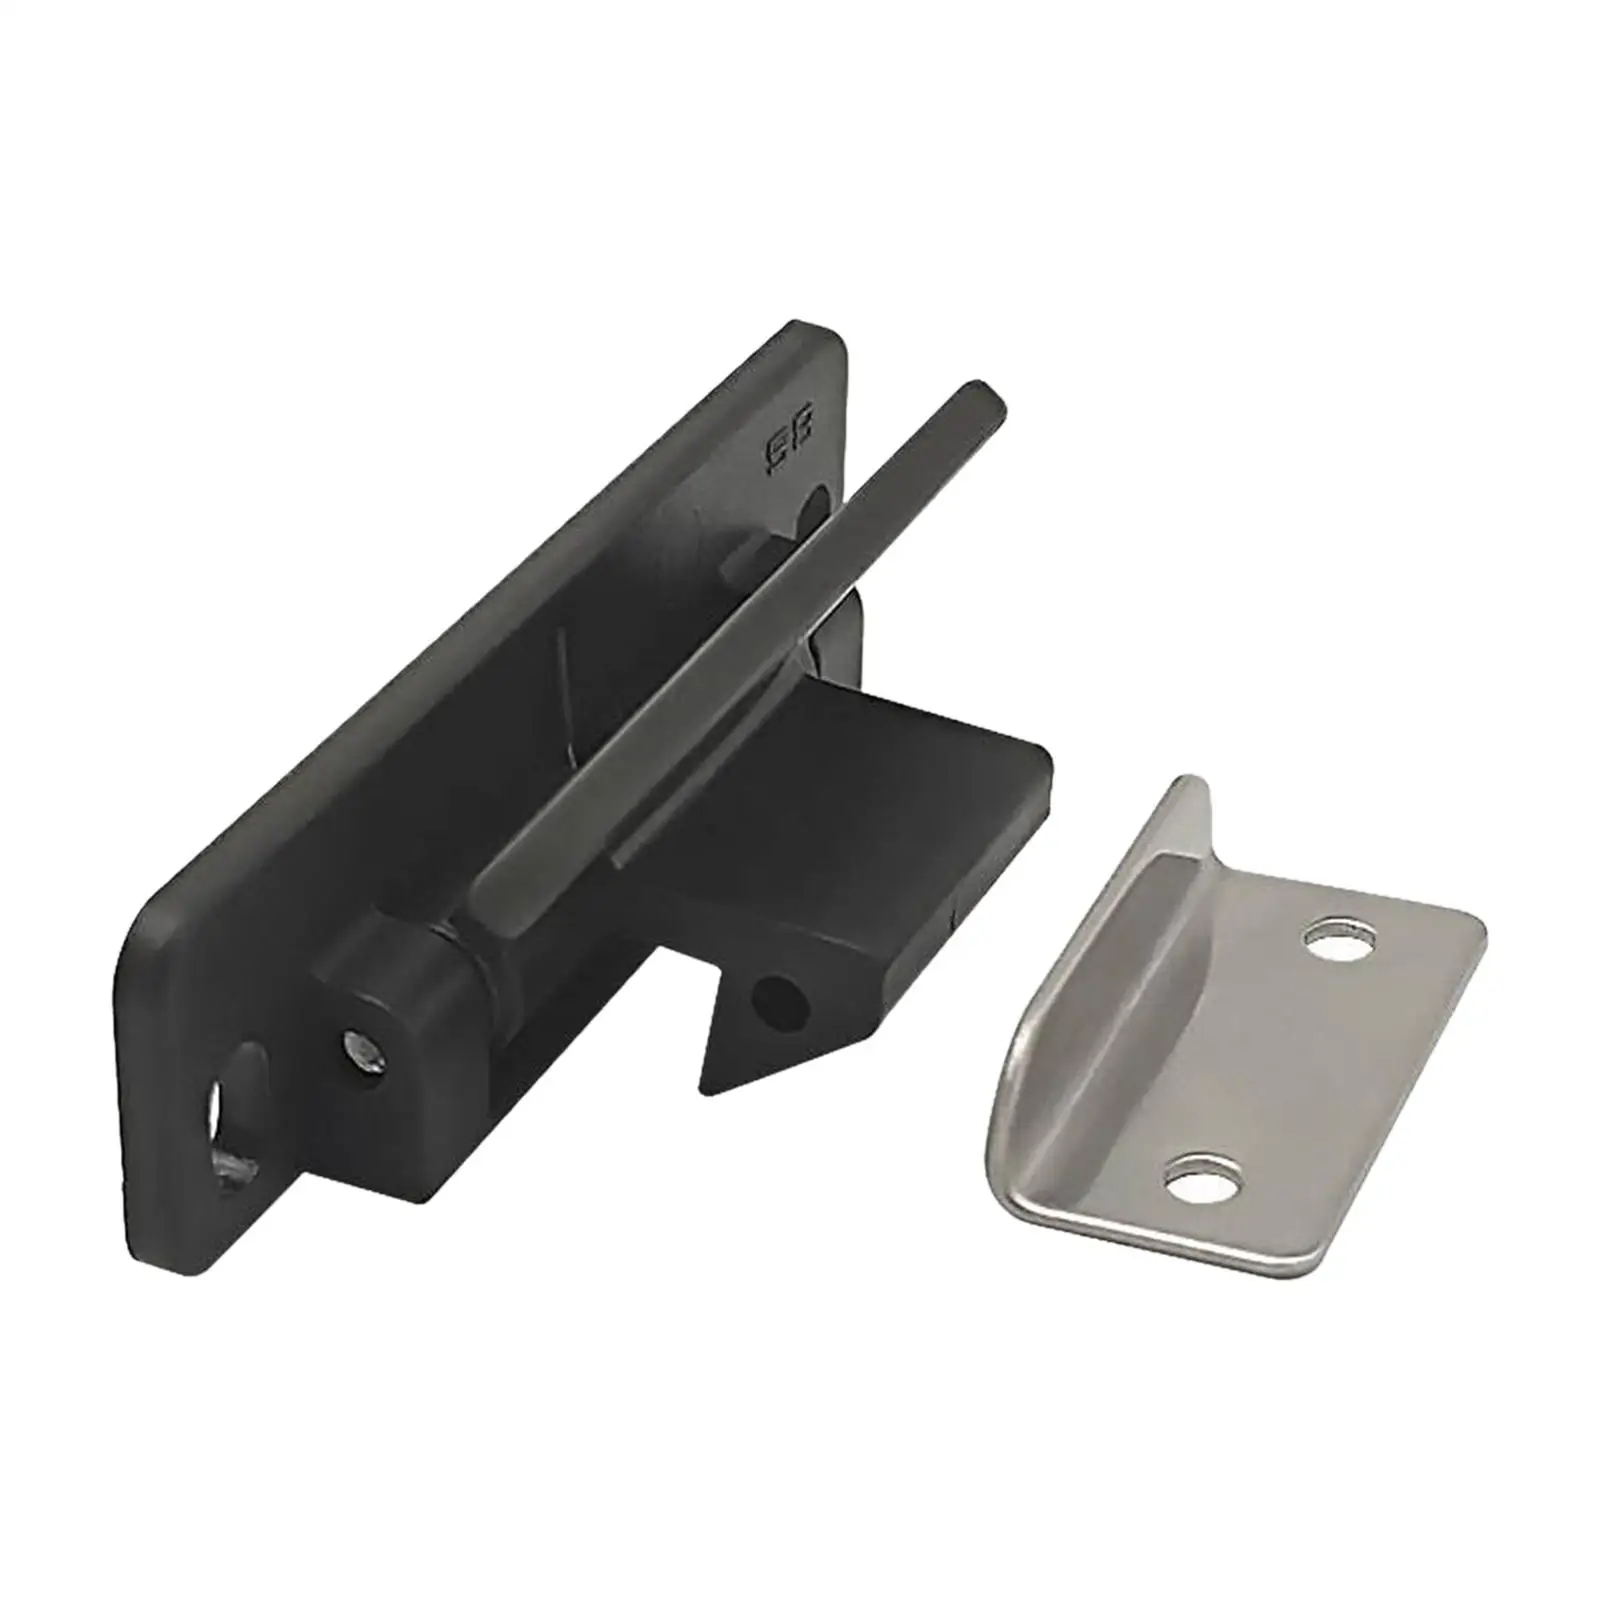 RV Drawer latches Modification Lock Accessories Closet Door Catch Latch for Cupboard Wardrobe Kitchen Drawers Closets durable